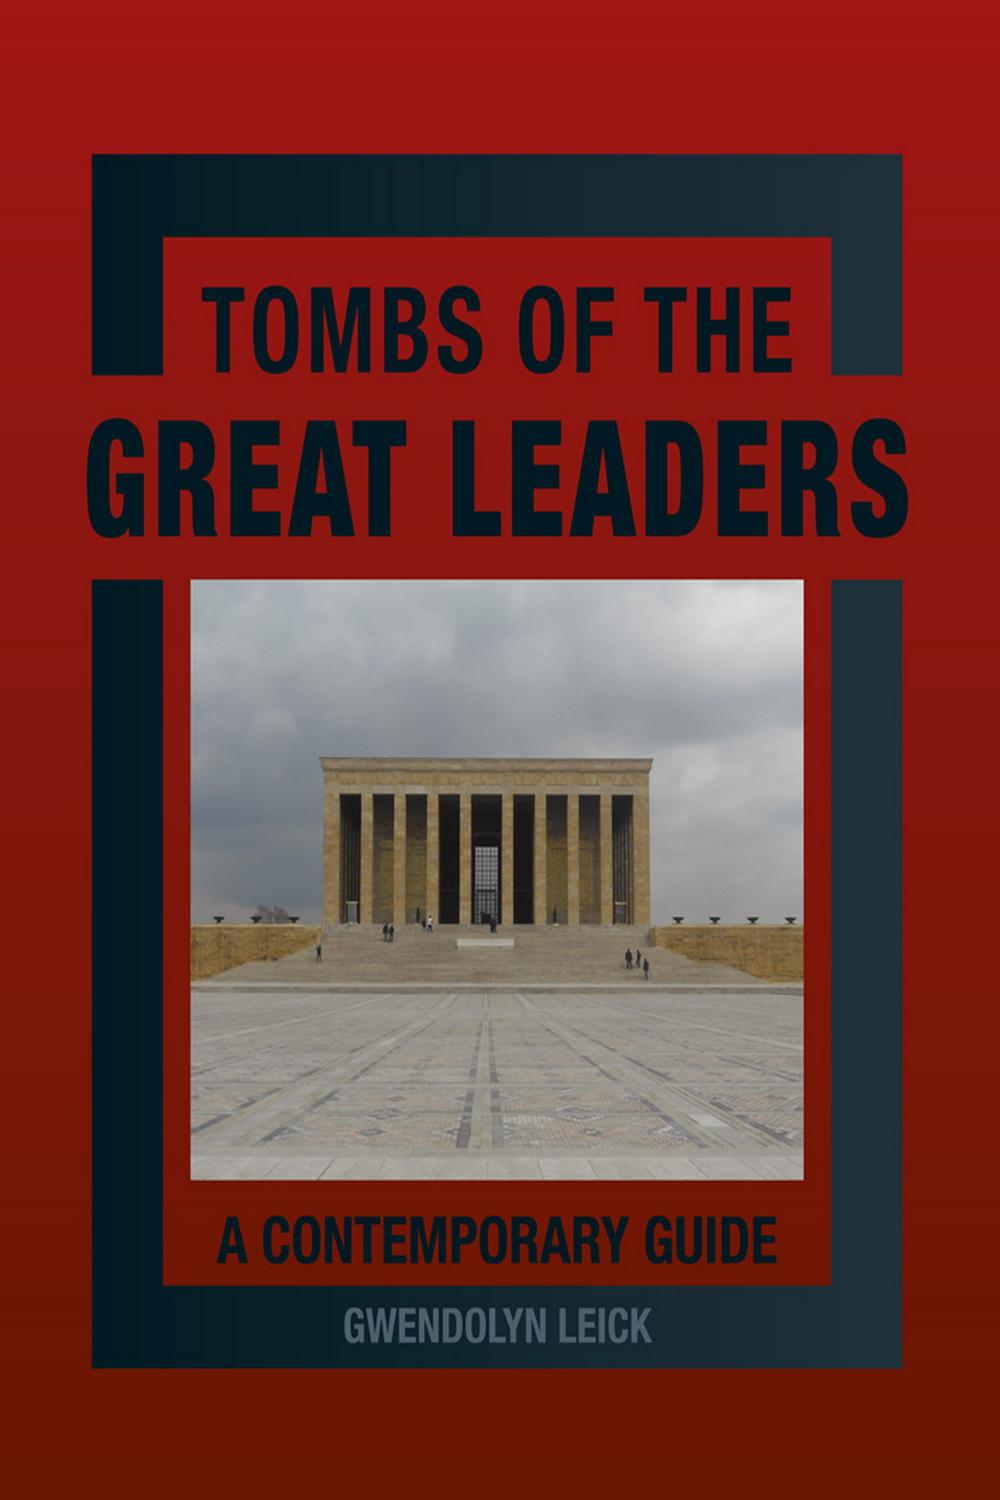 Tombs of the Great Leaders - Gwendolyn Leick